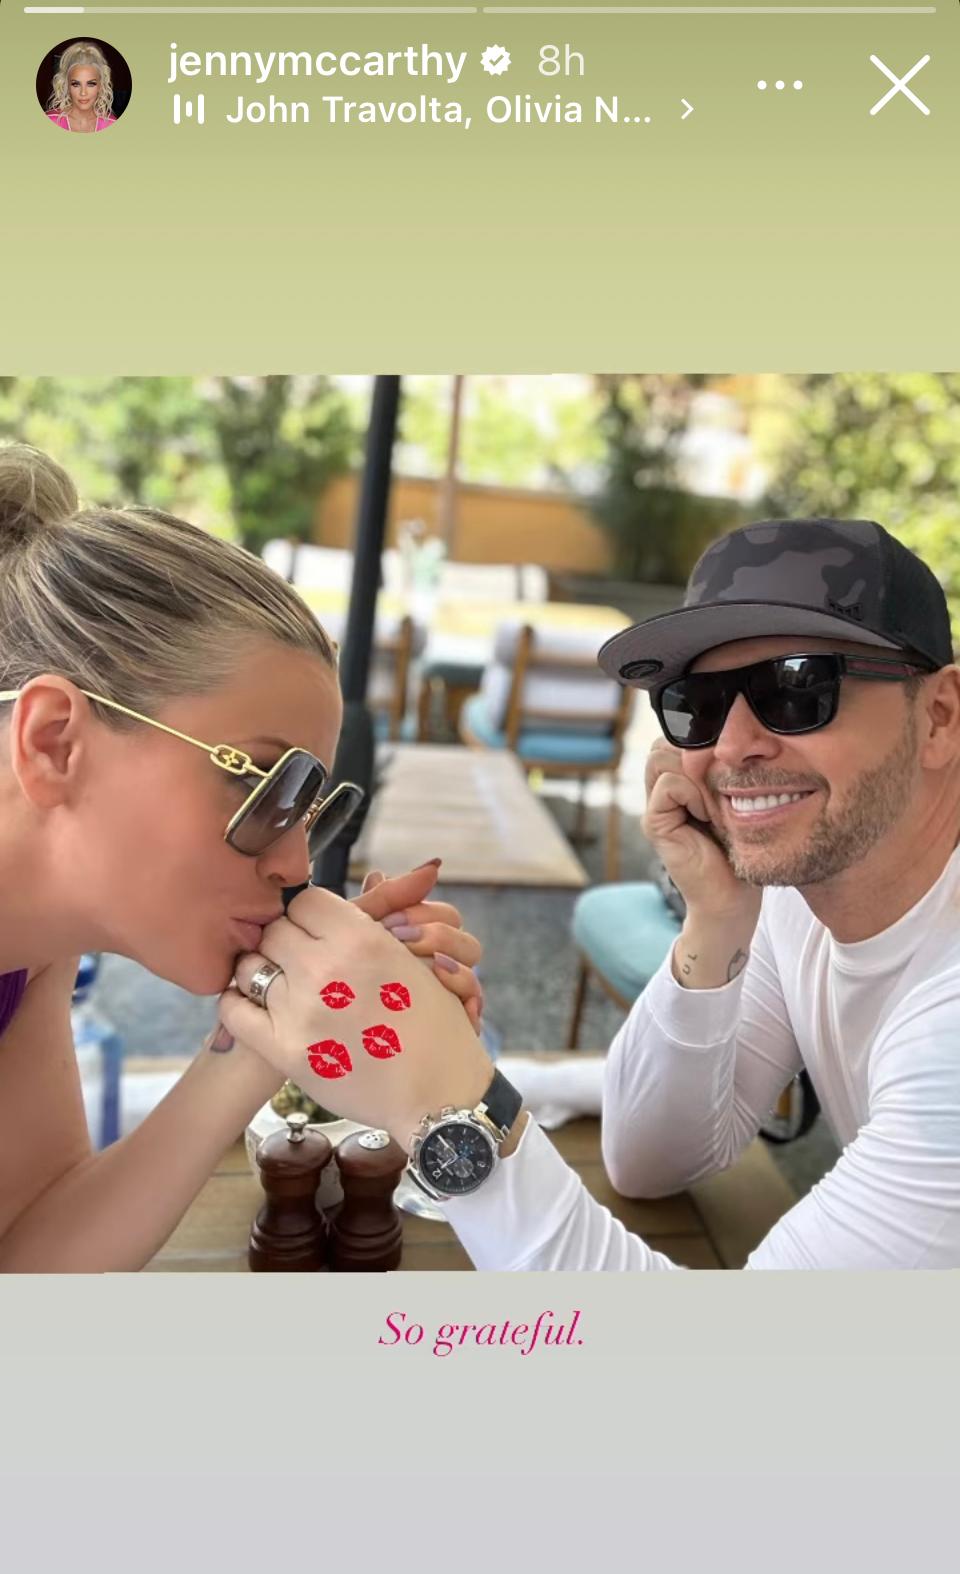 Jenny McCarthy and Donnie Wahlberg Date Night IG Stories